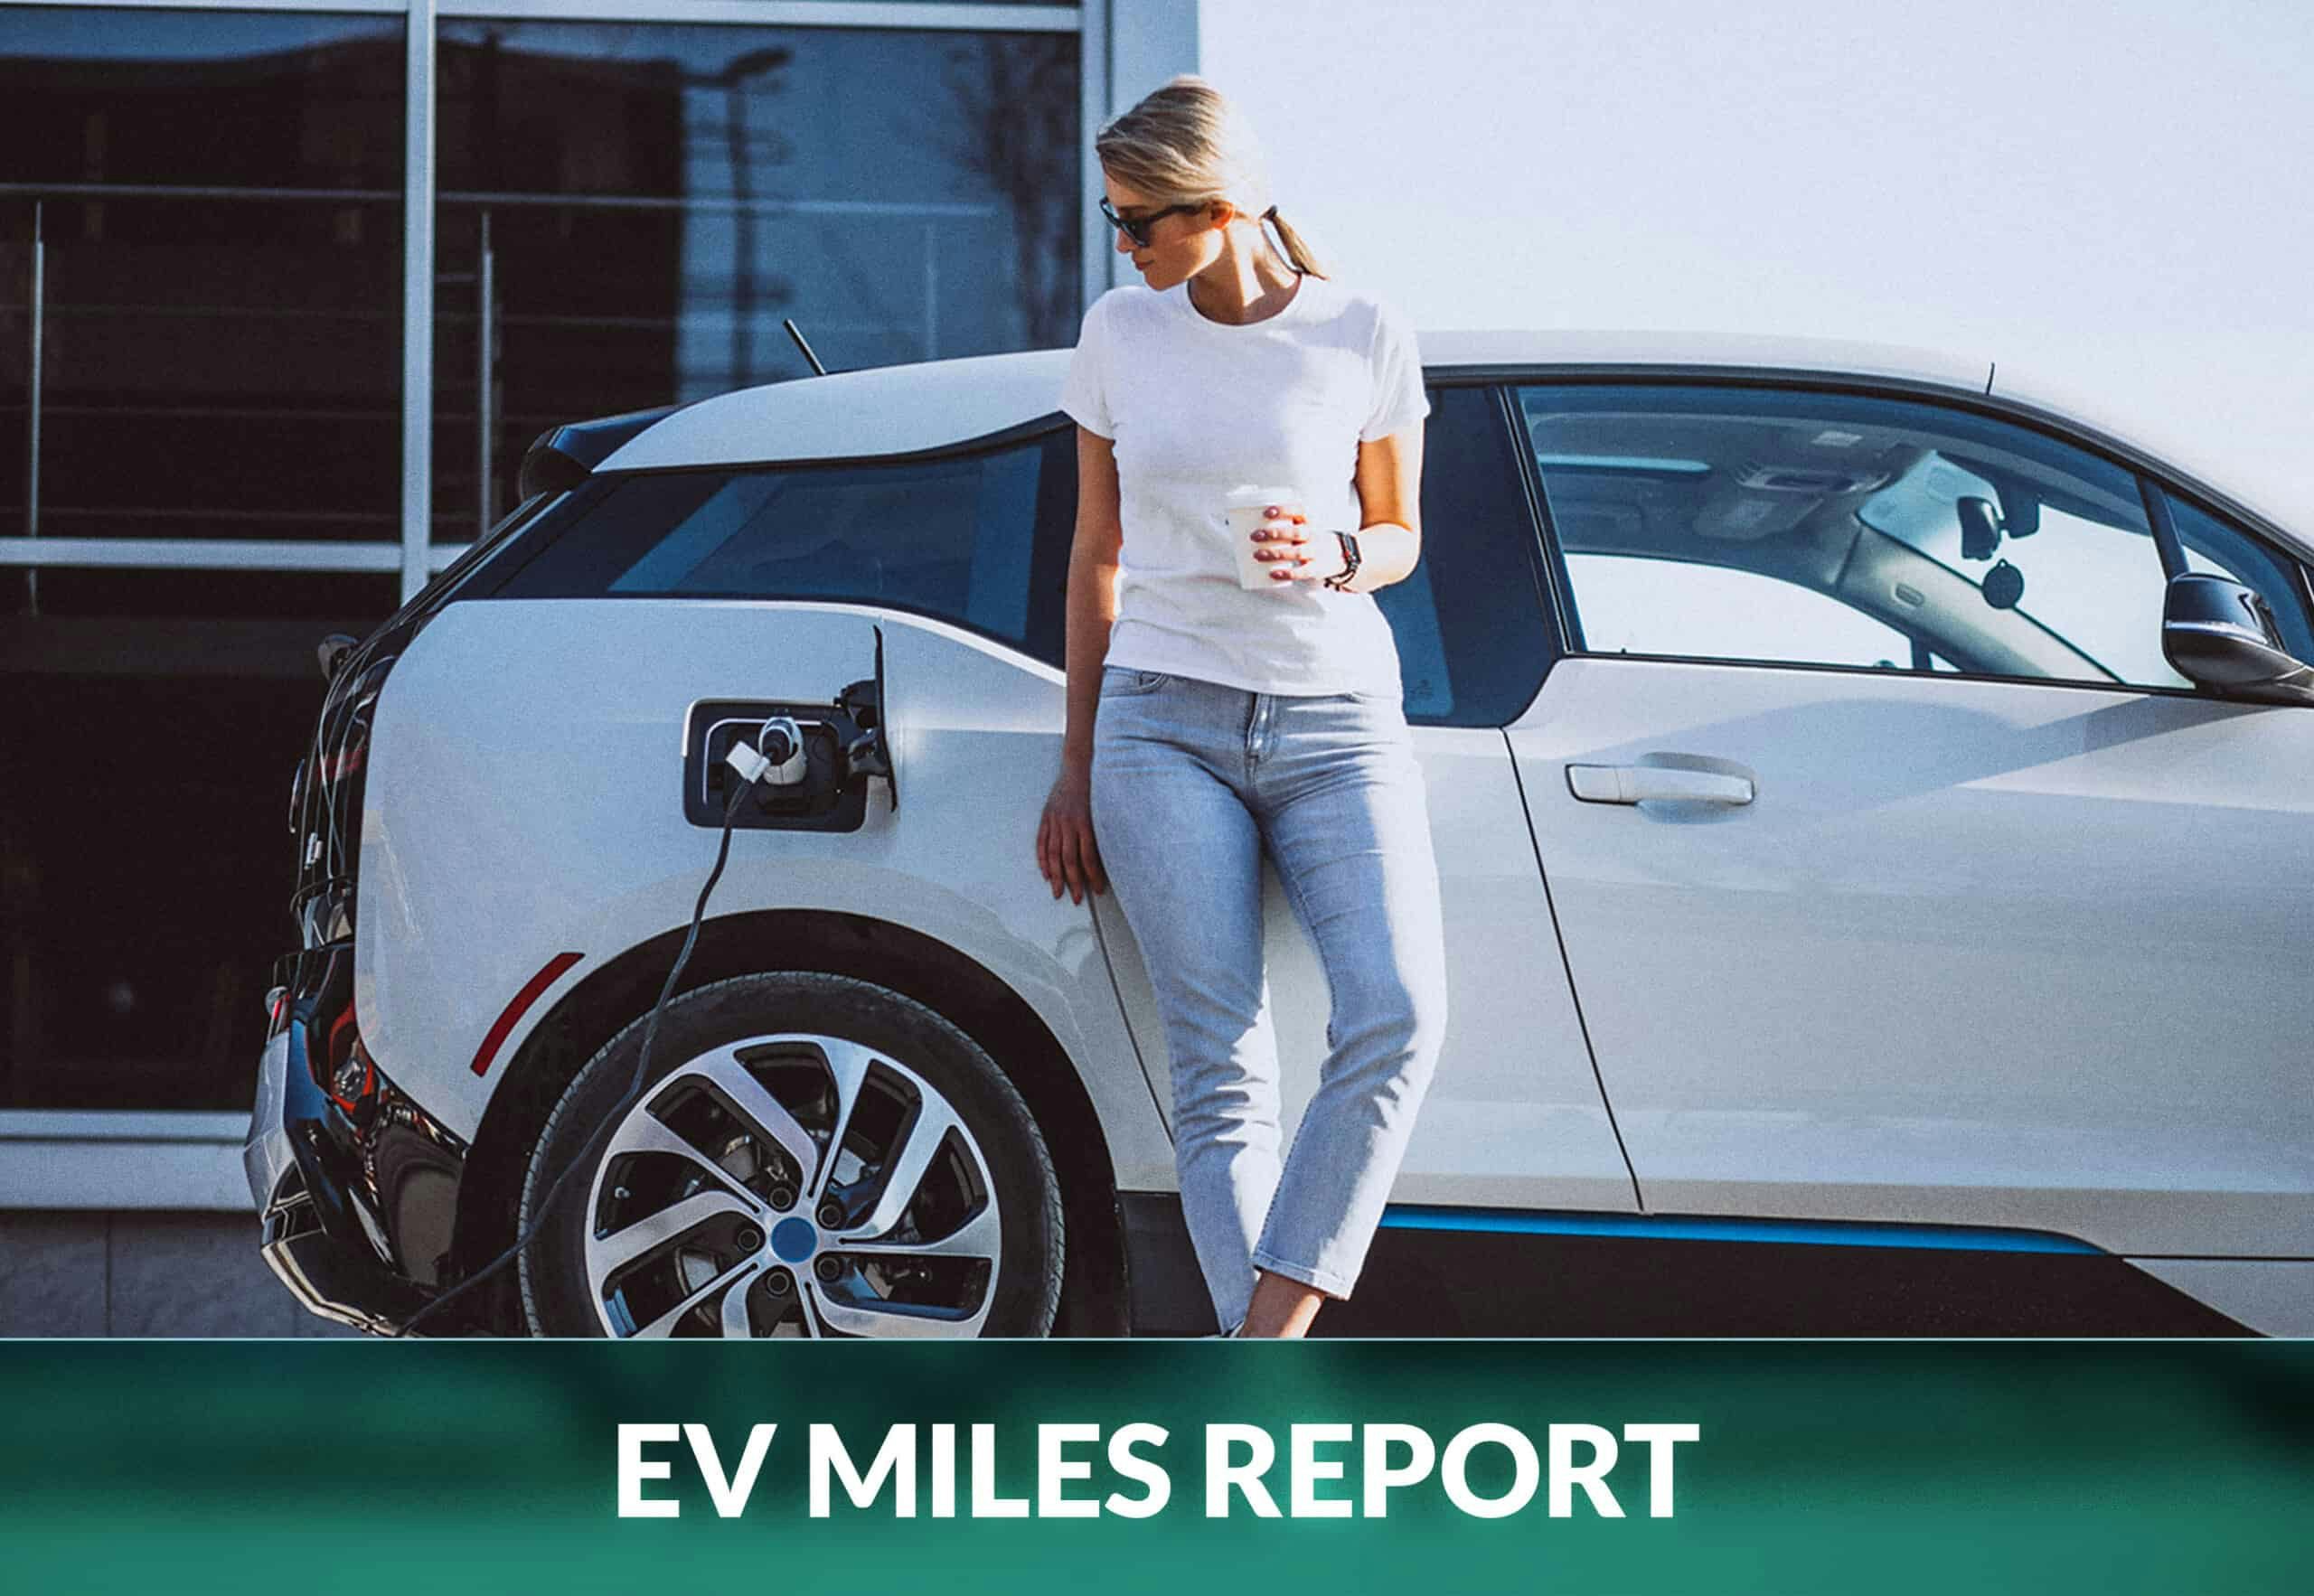 Electric vehicle miles report